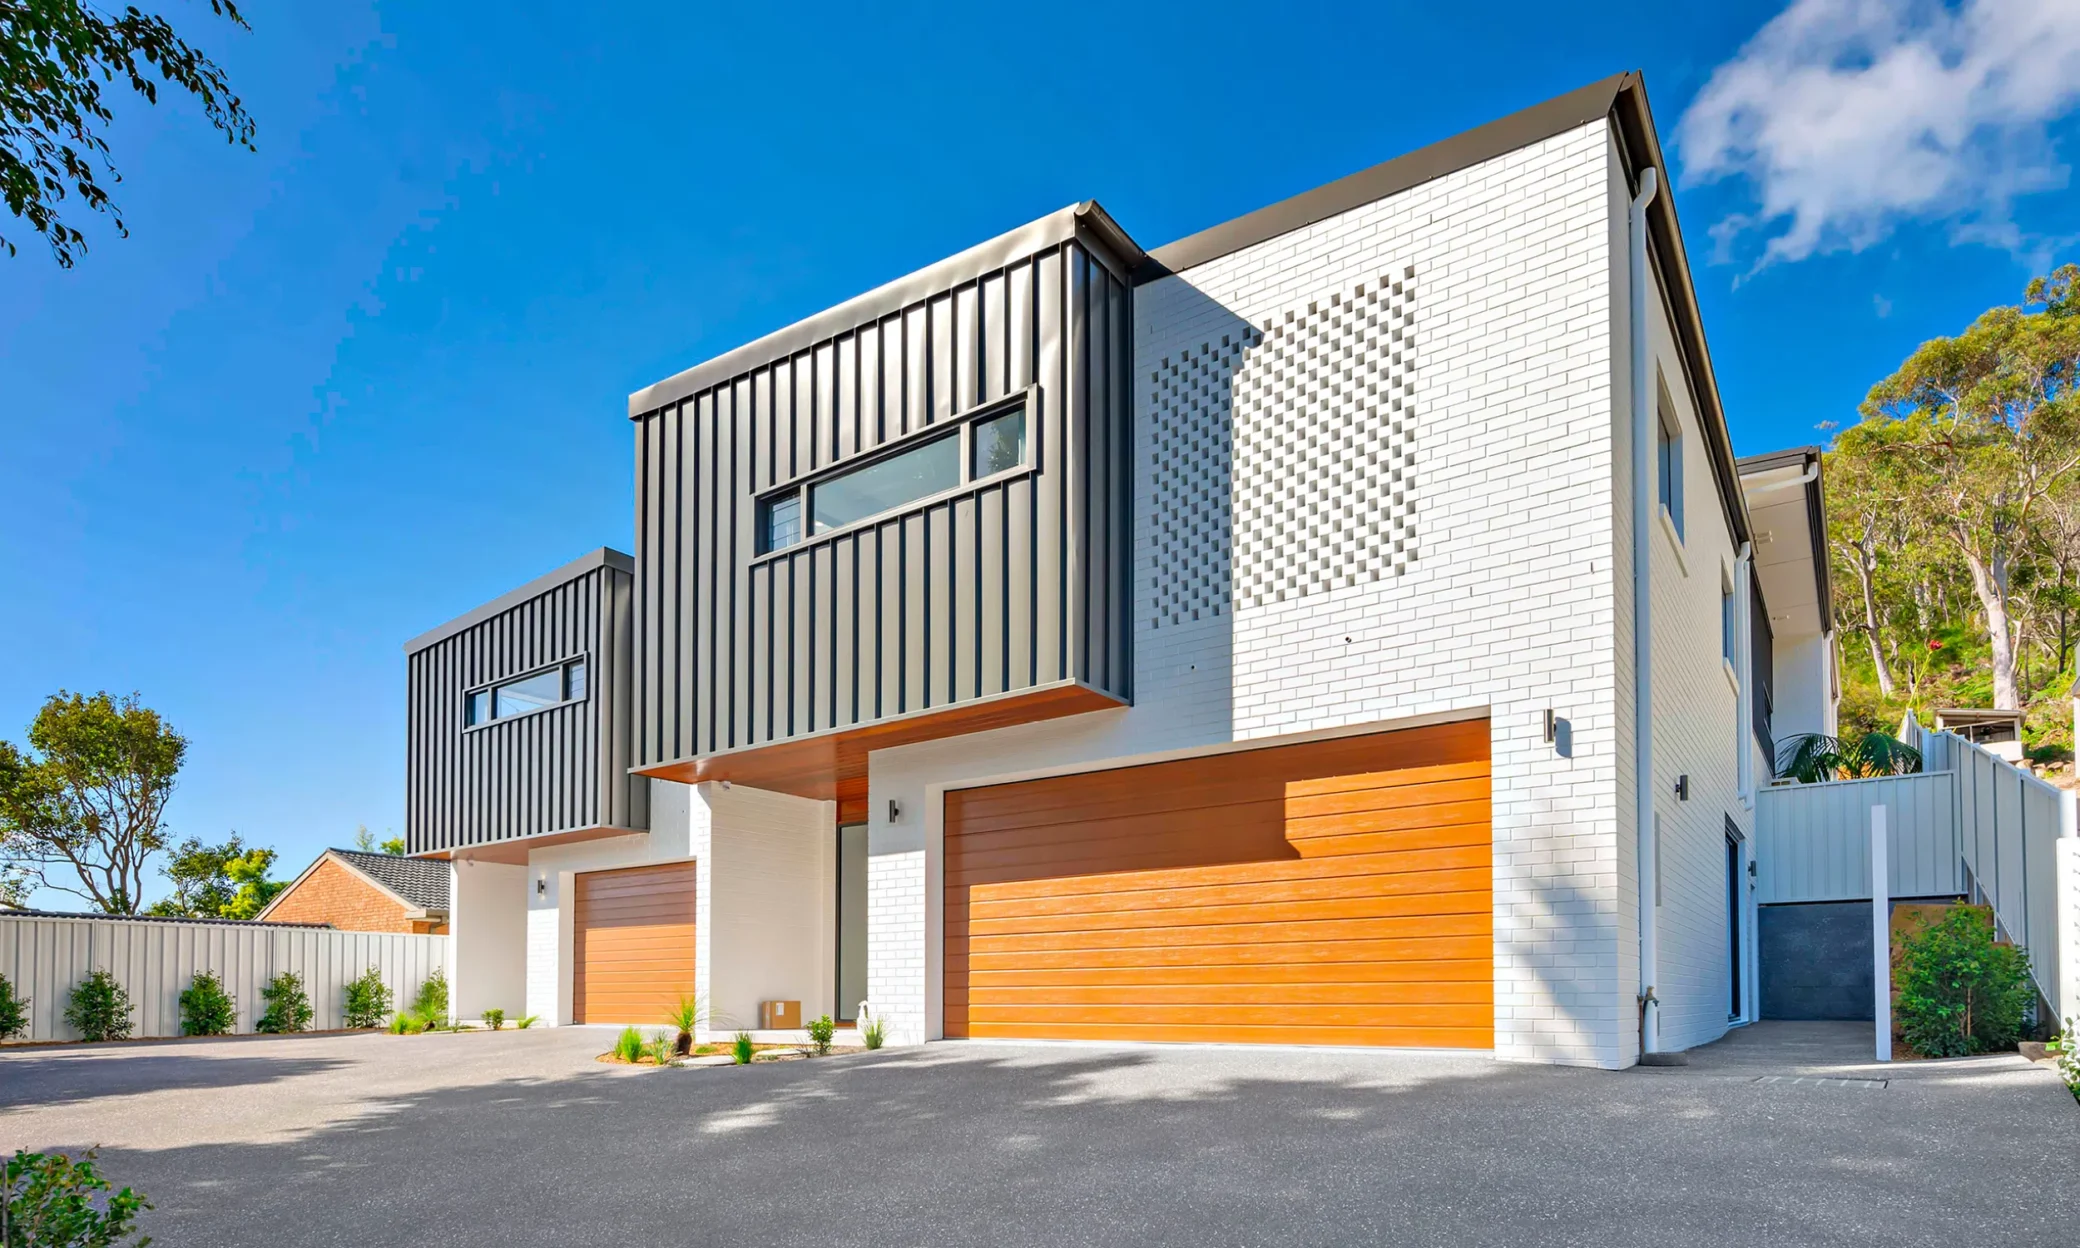 Modern two-story house in Nelson Bay with a geometric design, featuring a combination of white walls and dark gray metallic panels. It has wooden garage doors and is surrounded by green foliage under a clear blue sky